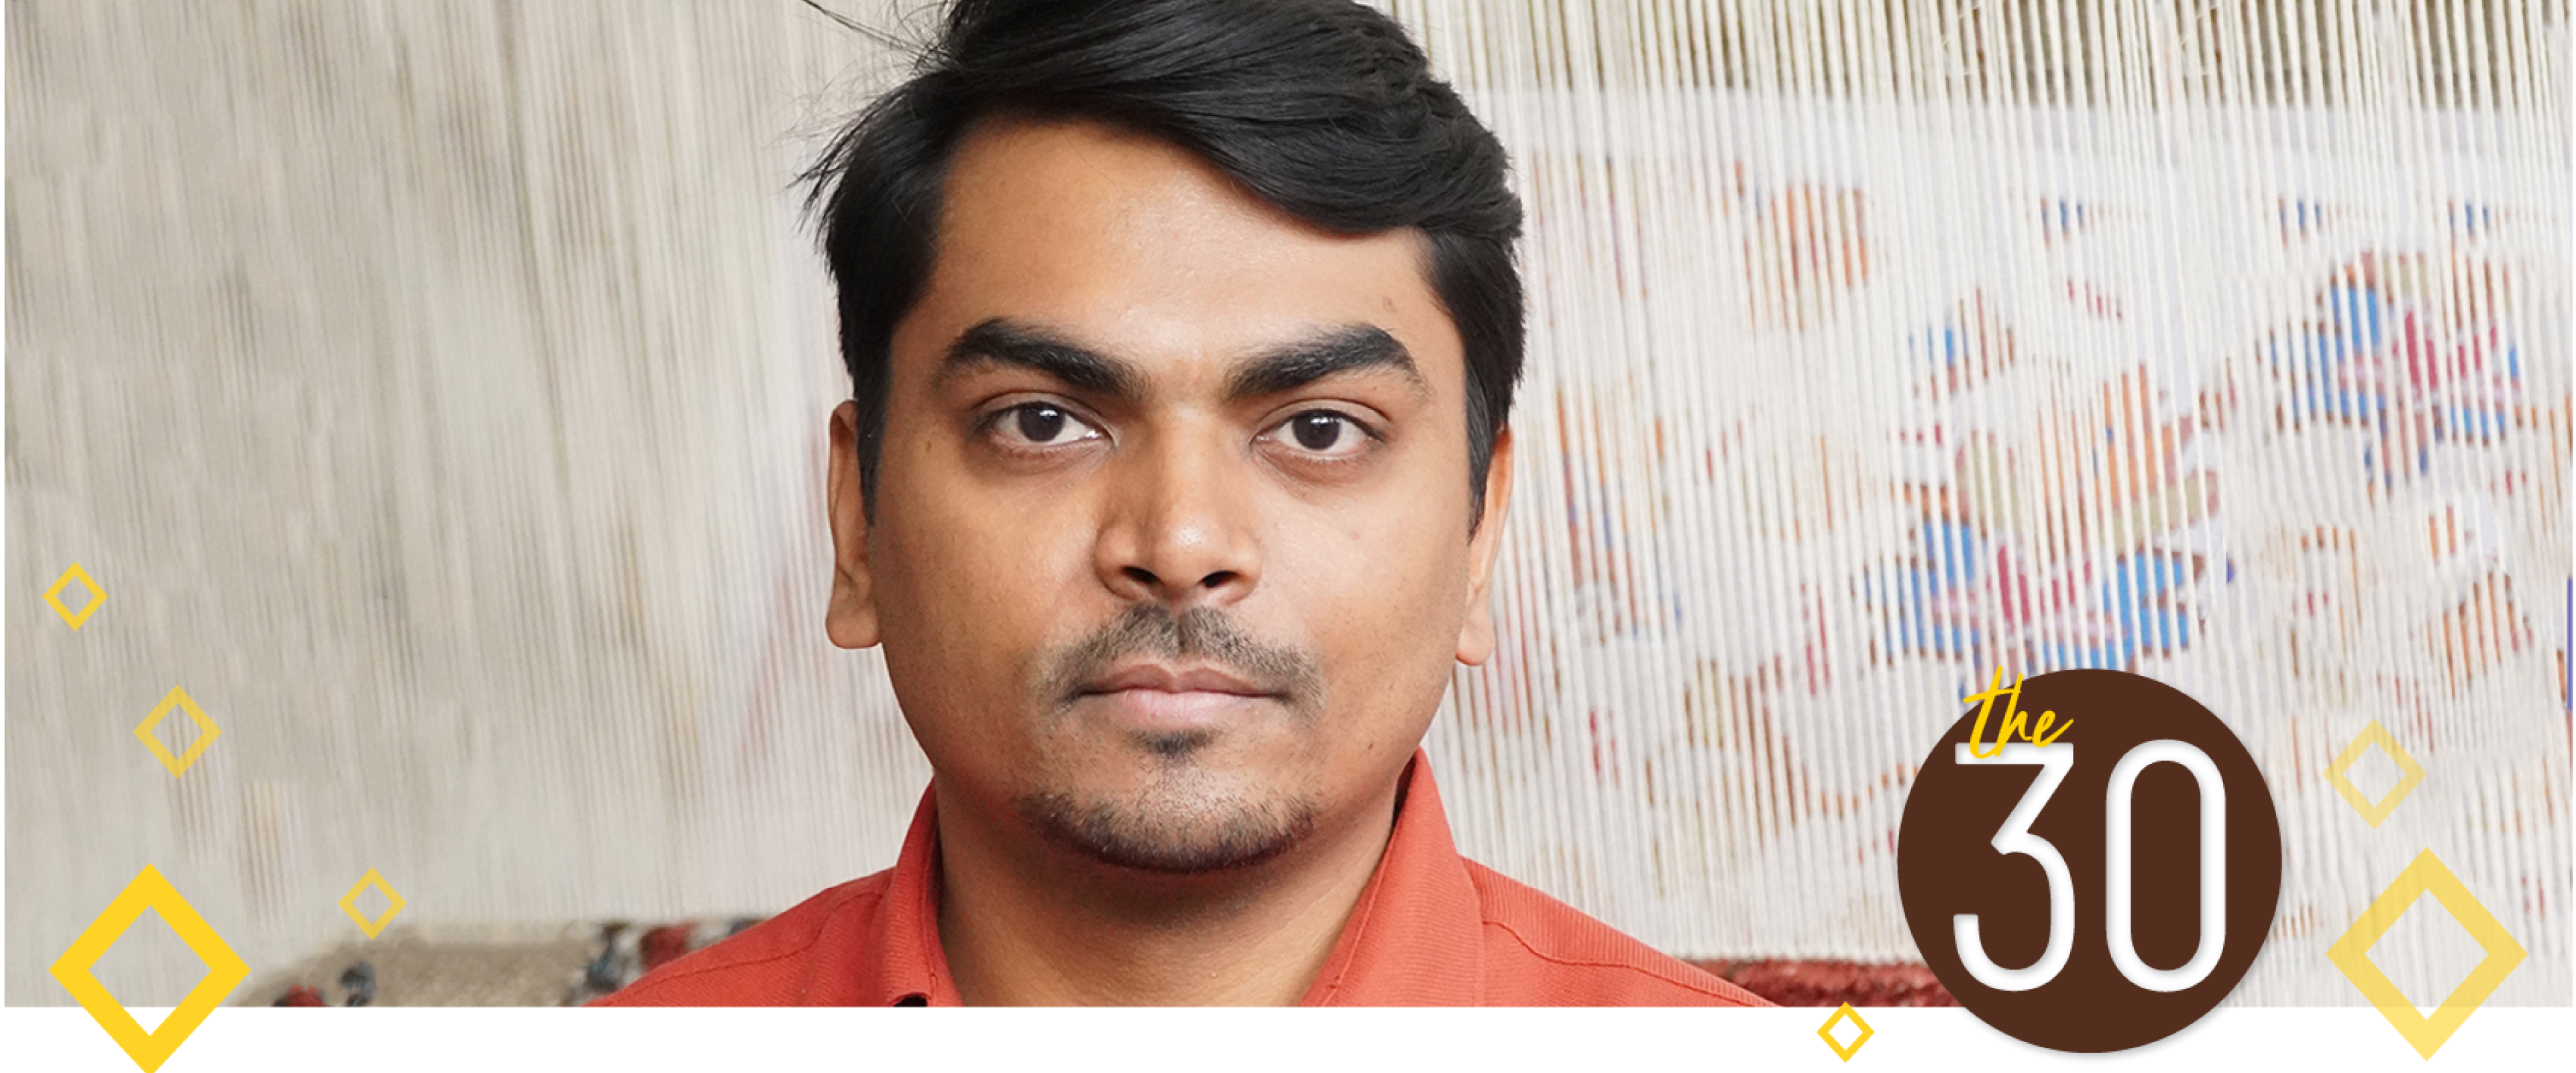 Deepak Maurya is wearing an orange shirt and standing in front of a rug on a loom.